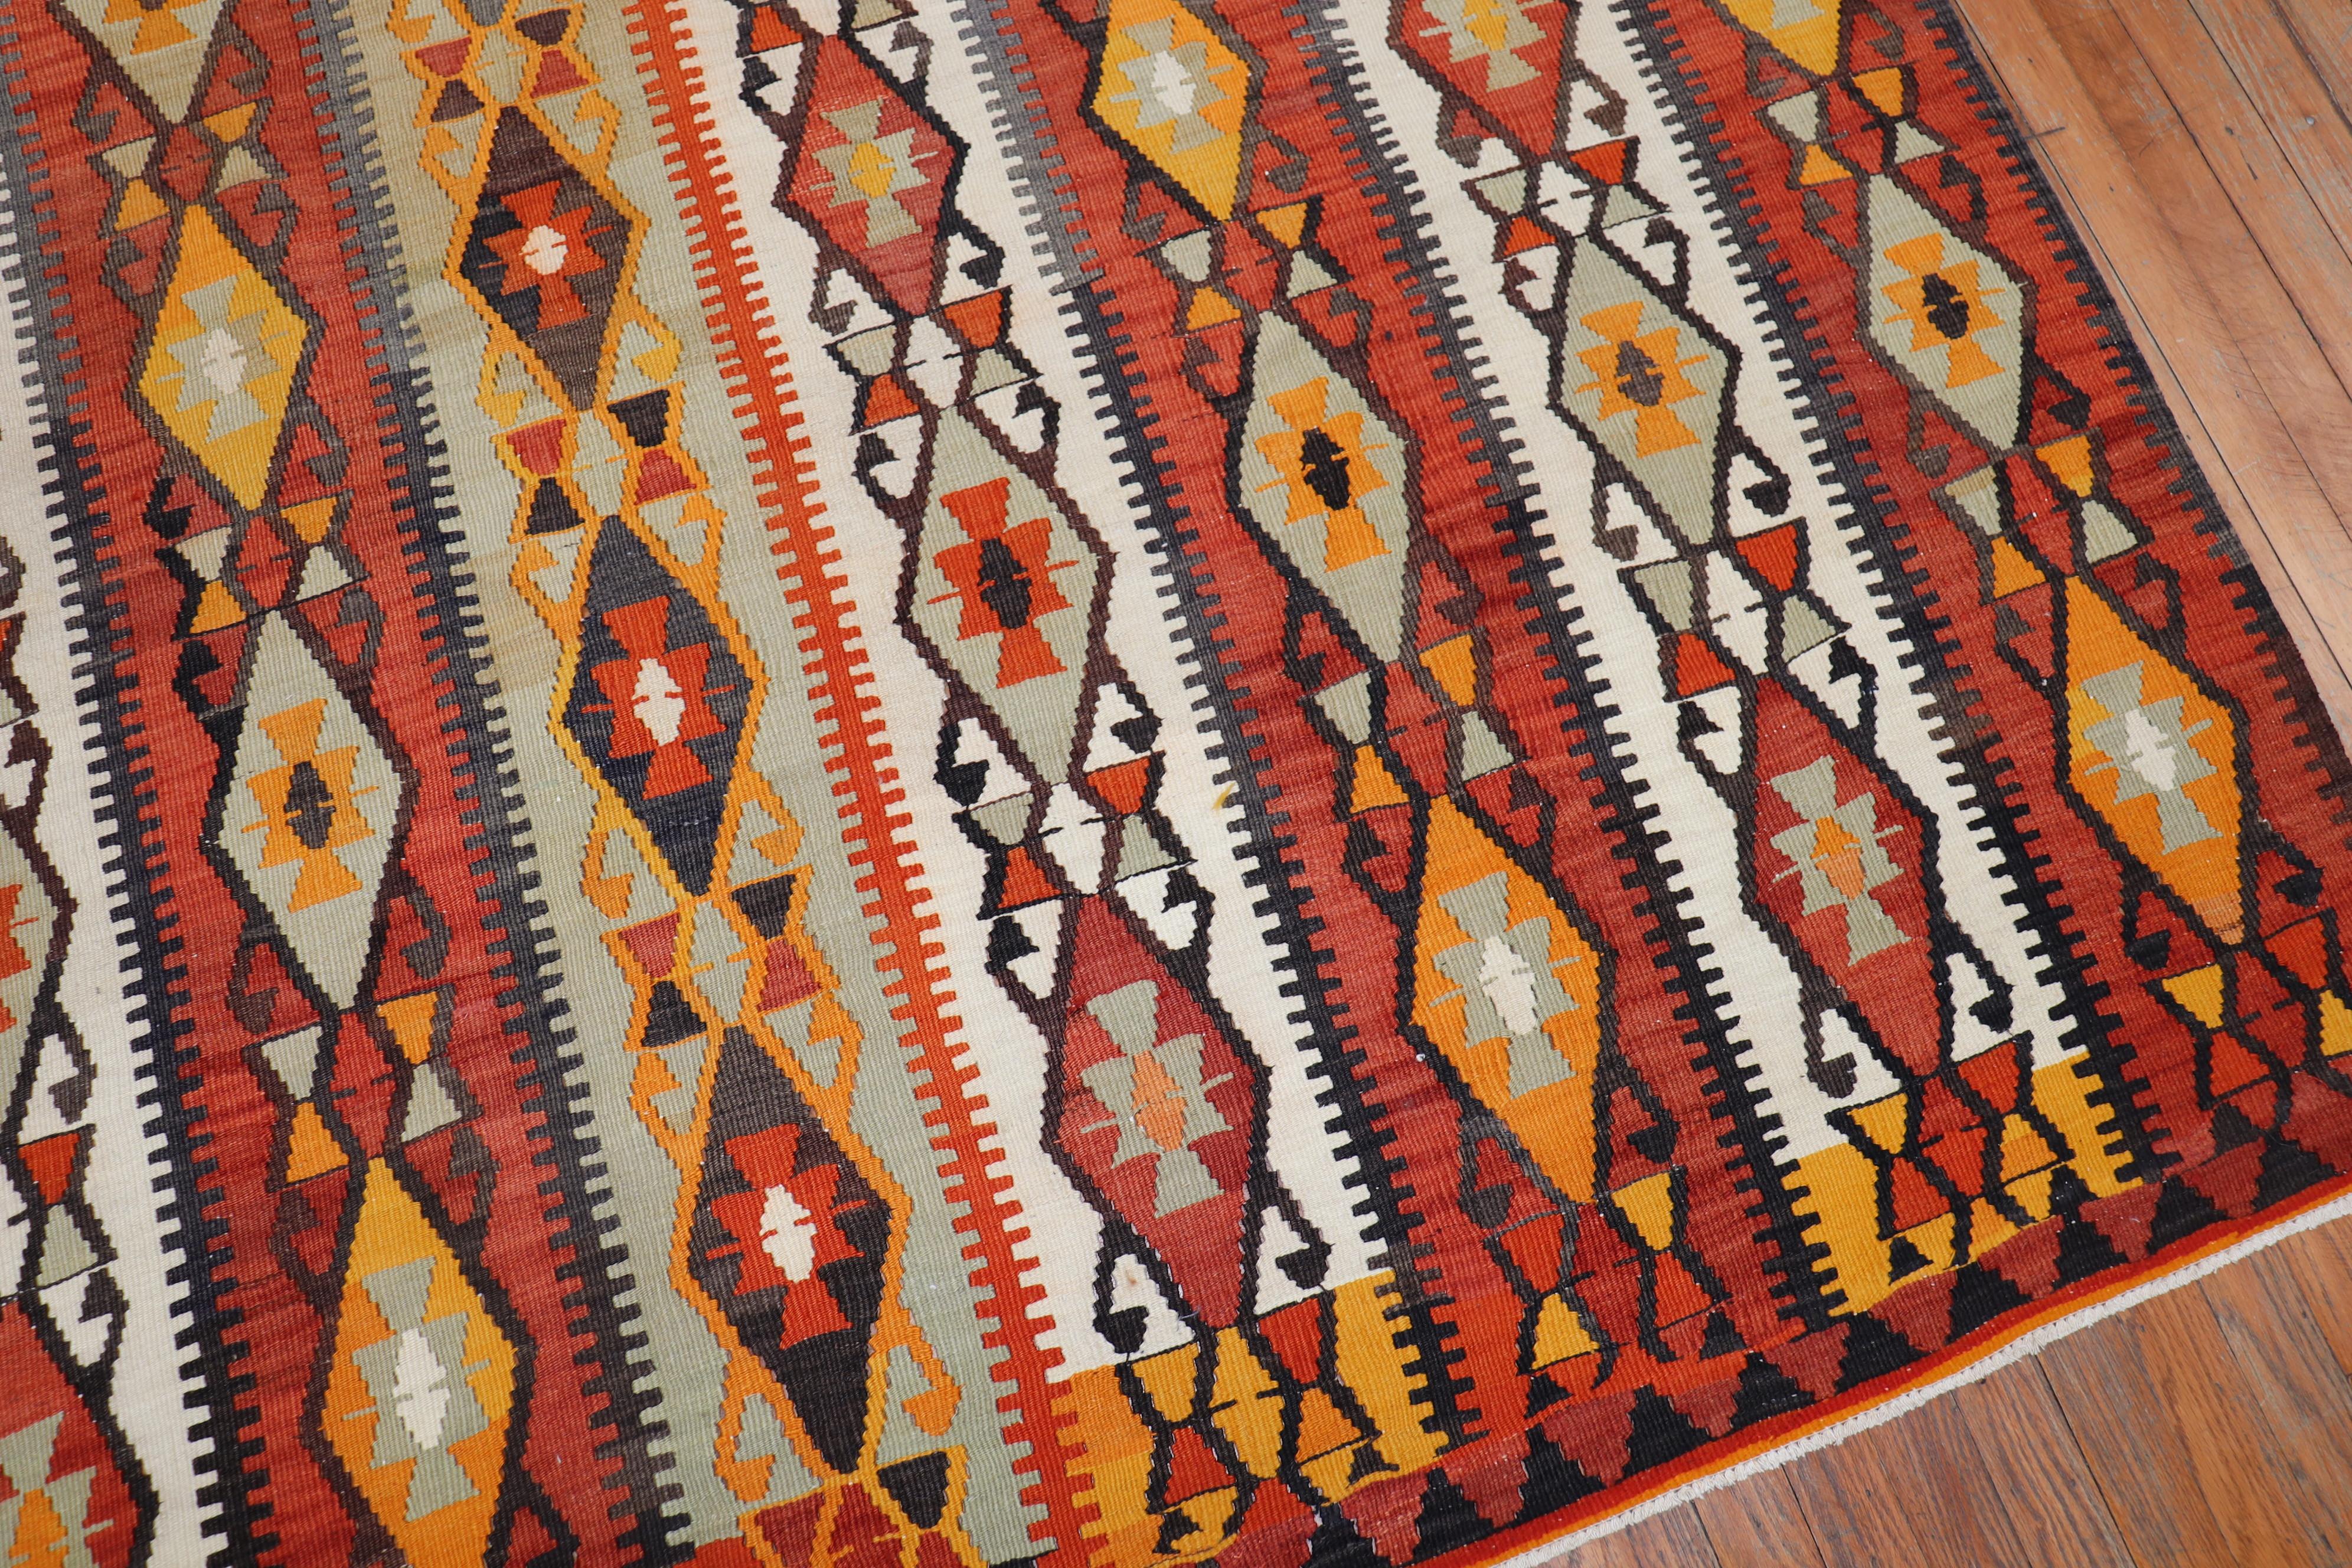 One of a kind, hand knotted Turkish tribal Kilim flat-weave from the second quarter of the 20th century with a rustic all-over geometric design predominantly in brick orange.

Measures: 7'9